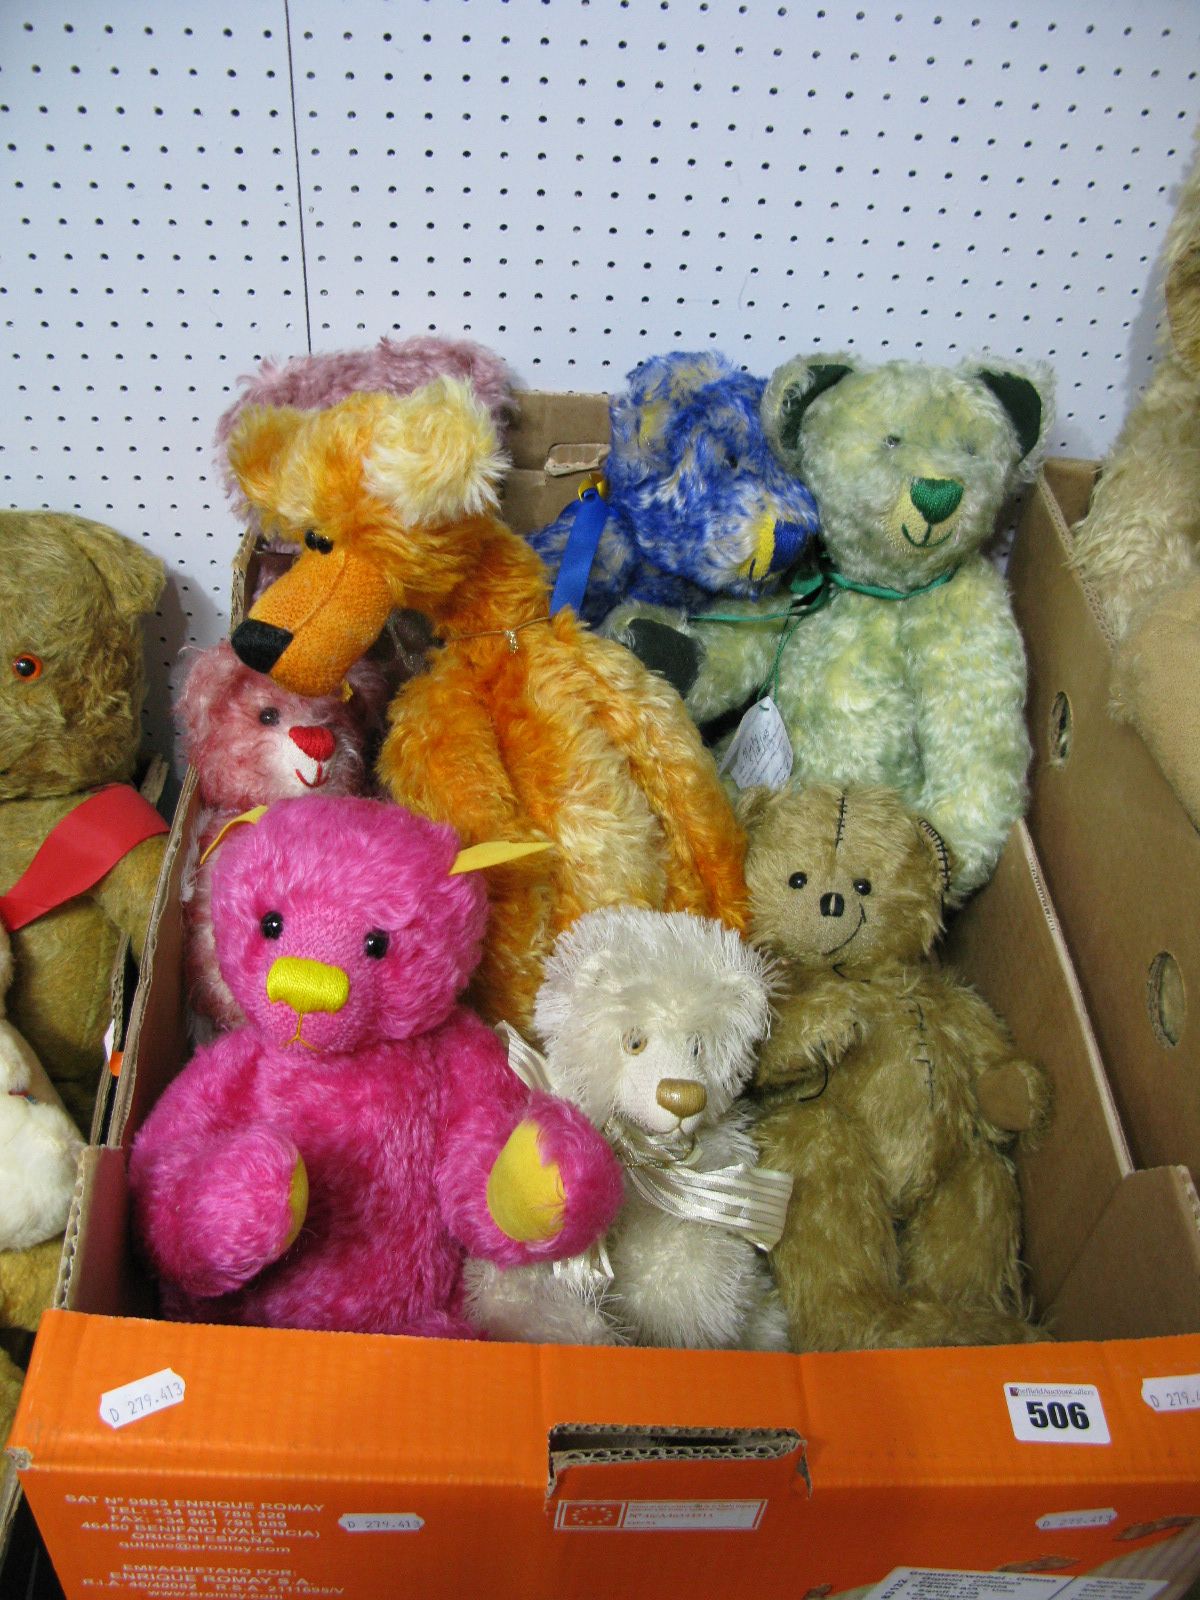 Eight Collectors Teddy Bears, "April" by Janis at Lavender Bears, 1 of 1, "Royale" by Janis at